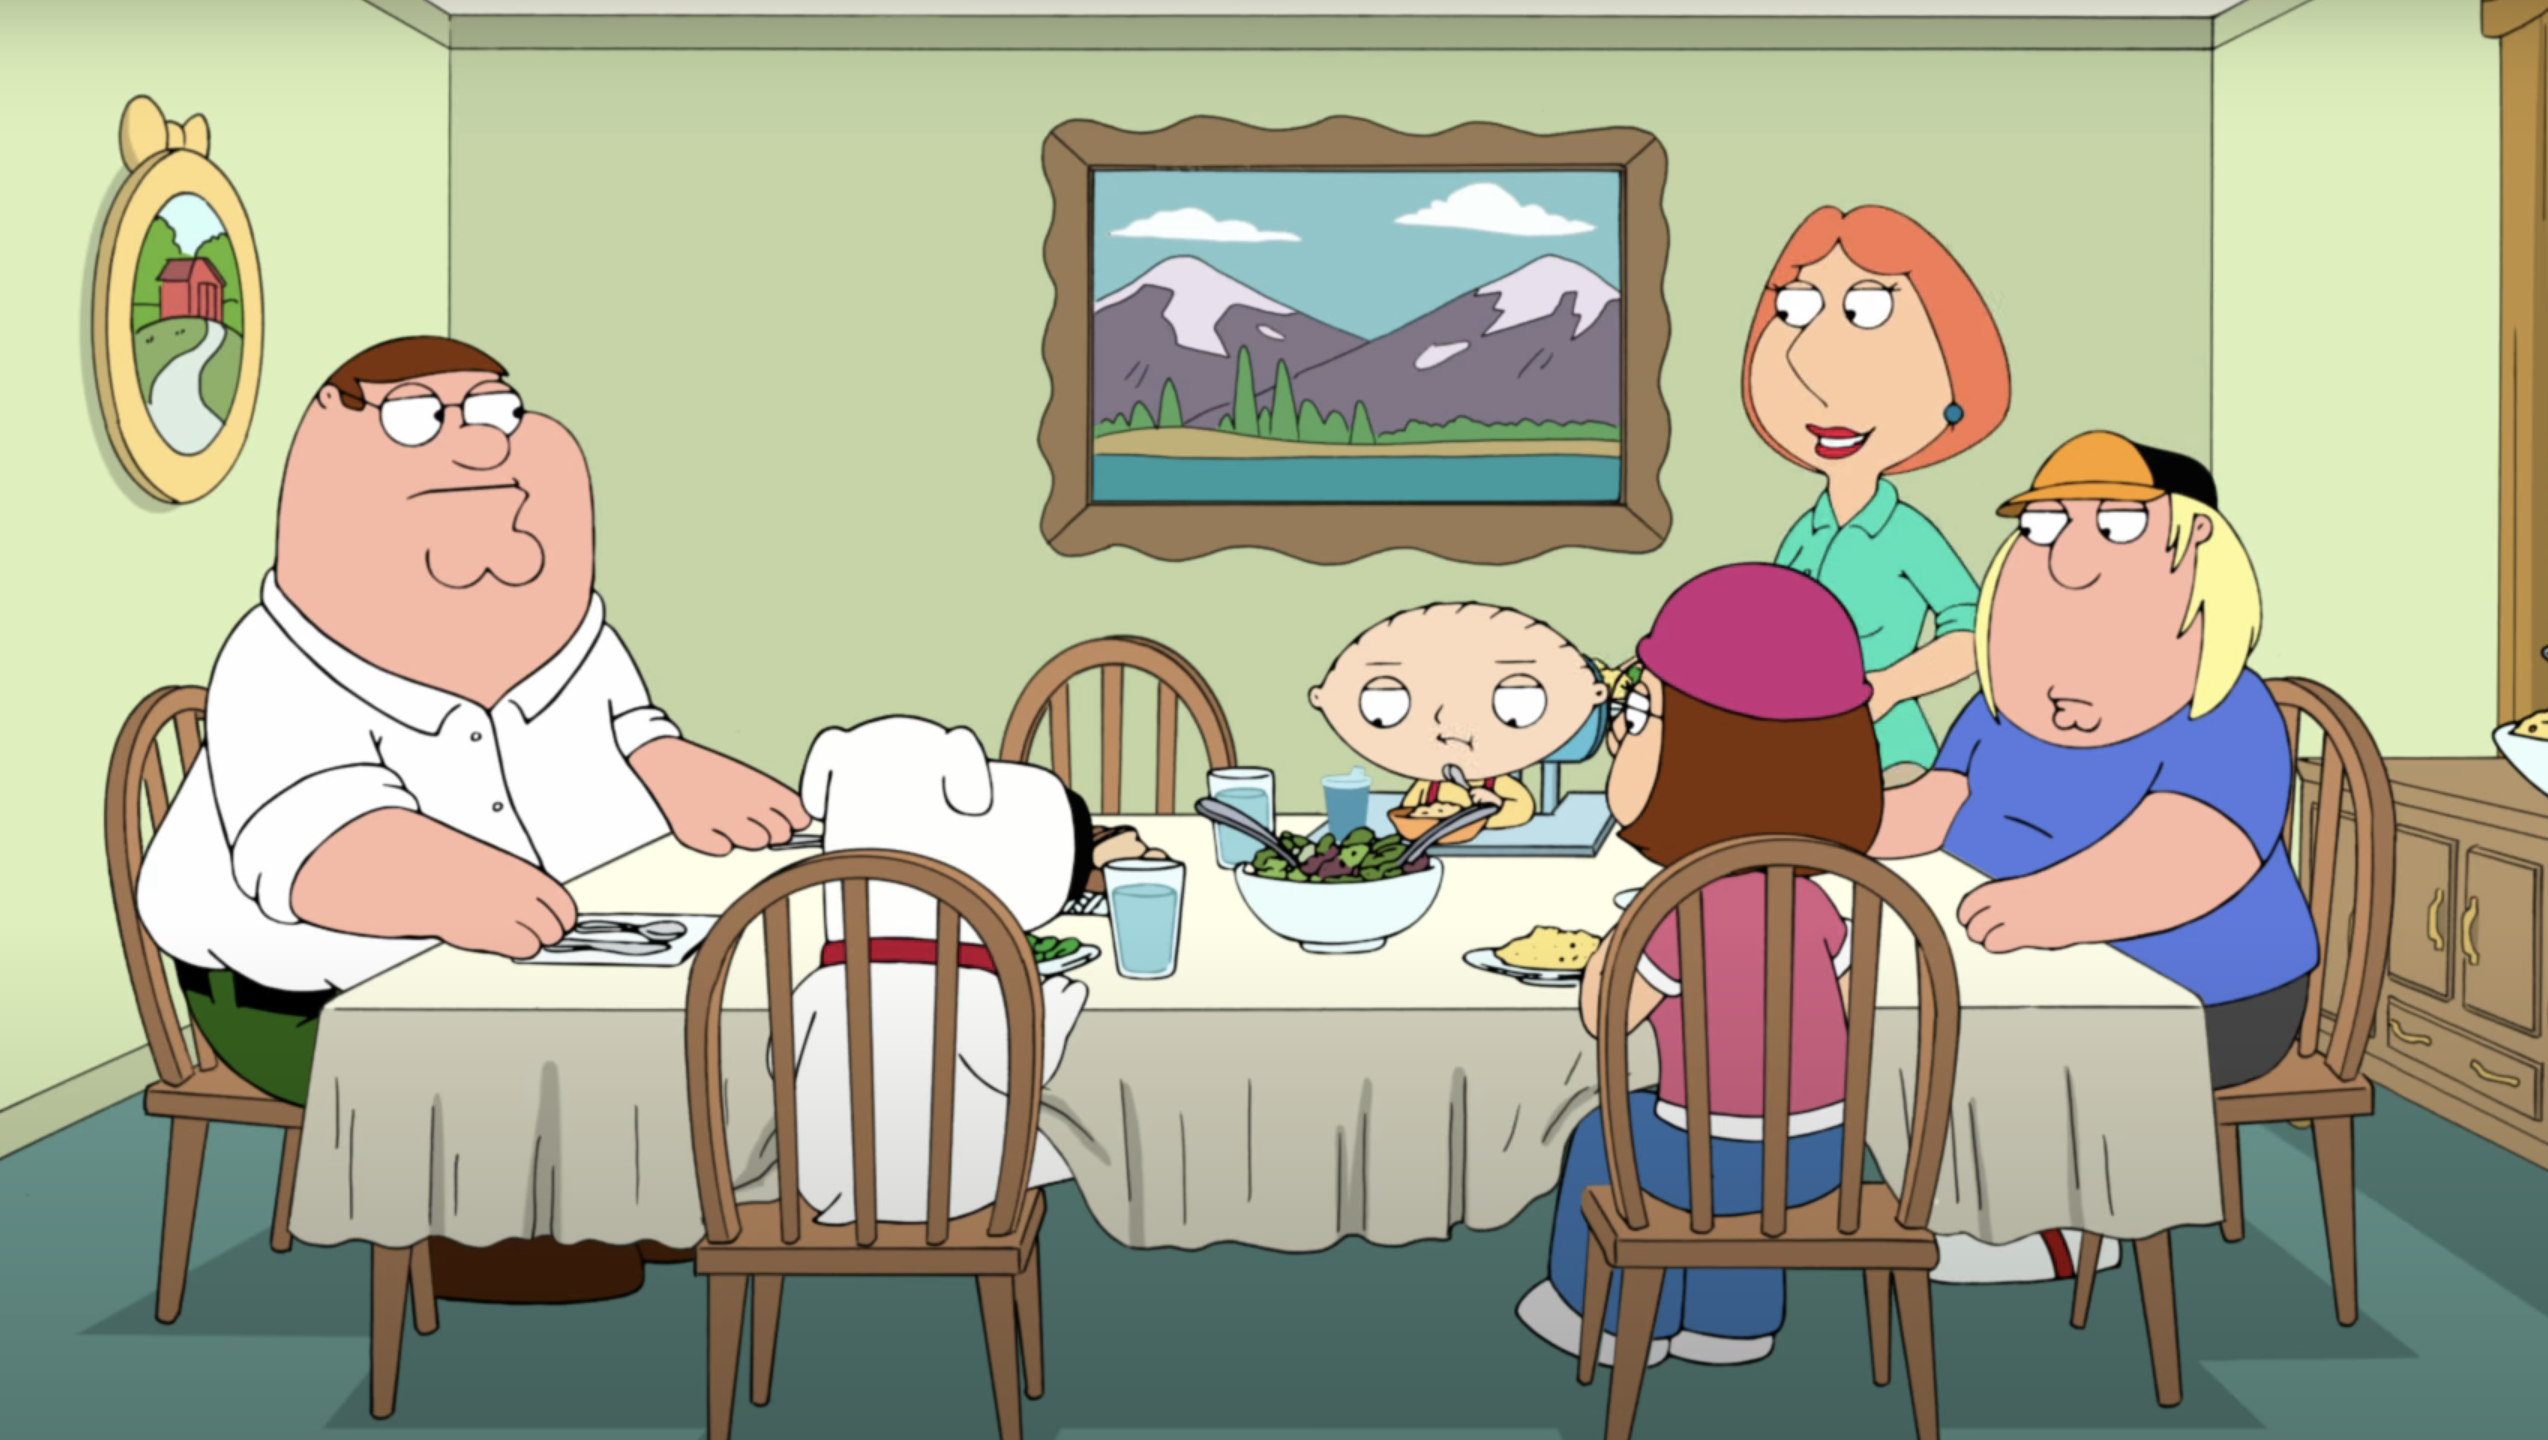 Peter, Lois, Meg, Stewie, and Chris Griffin sitting at the dining table in a scene from the animated show Family Guy